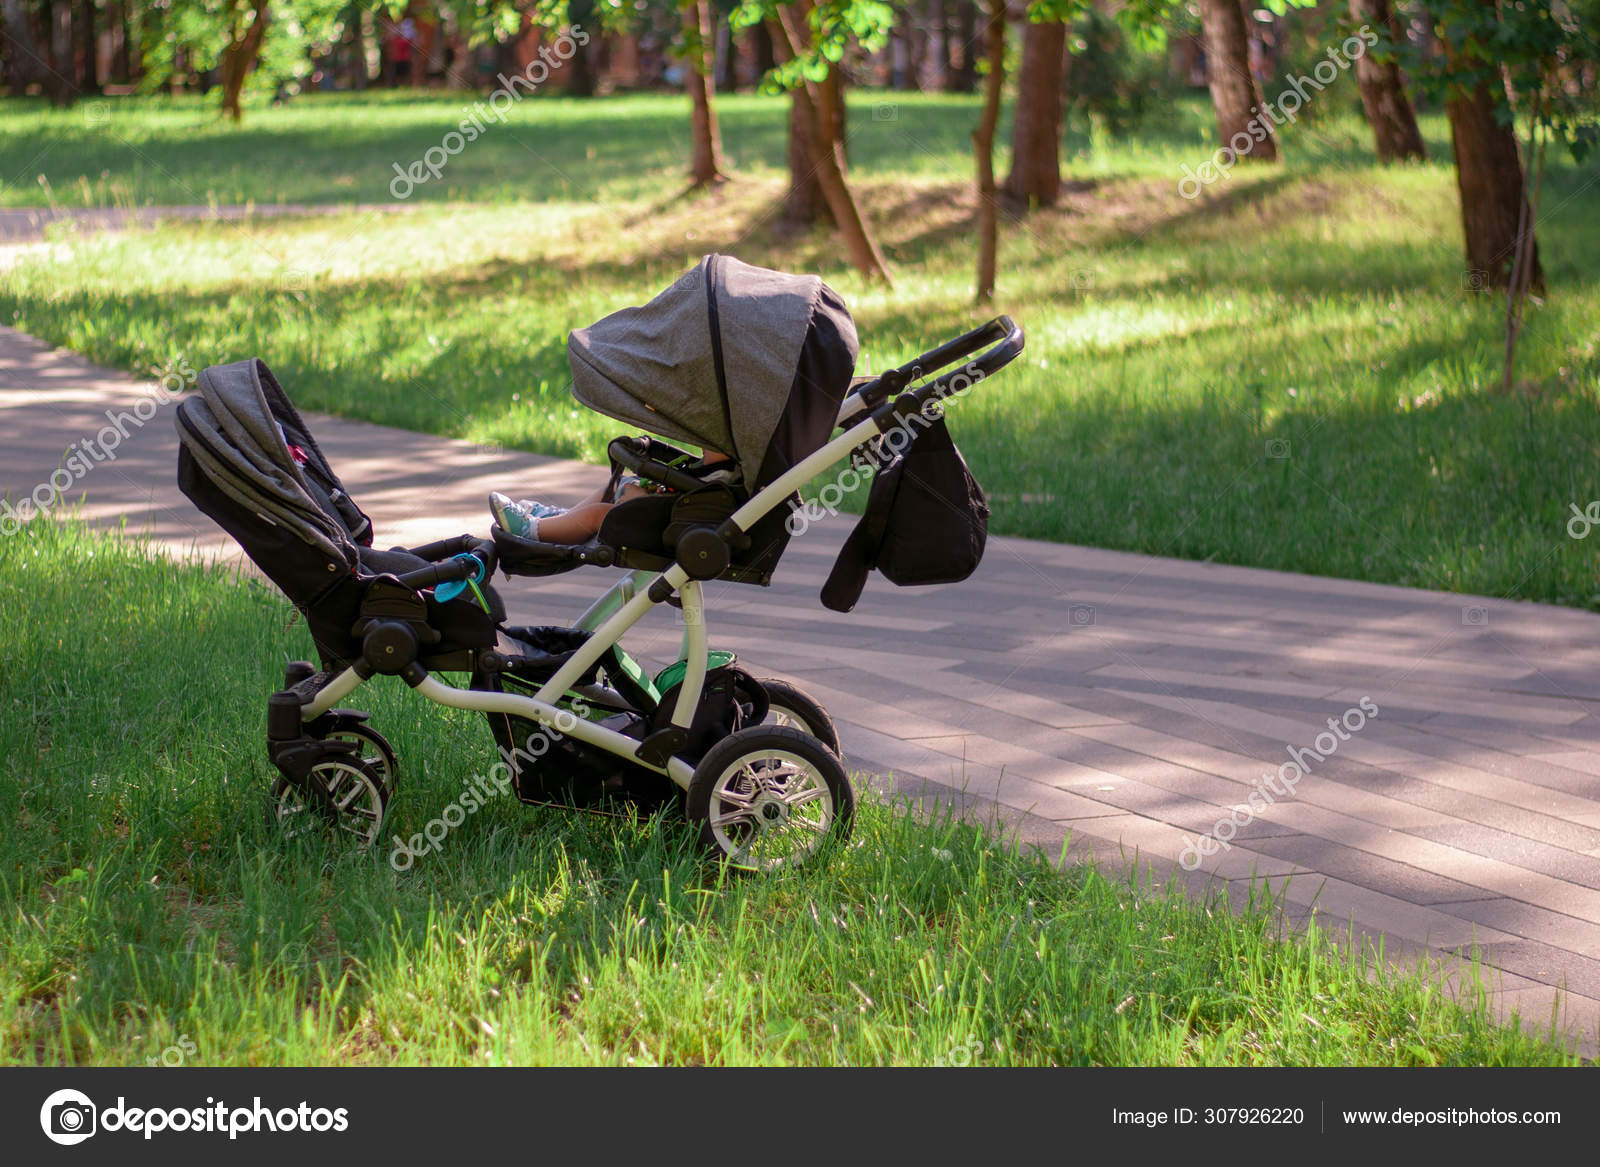 Double stroller Stock Photos, Royalty Free Double stroller Images